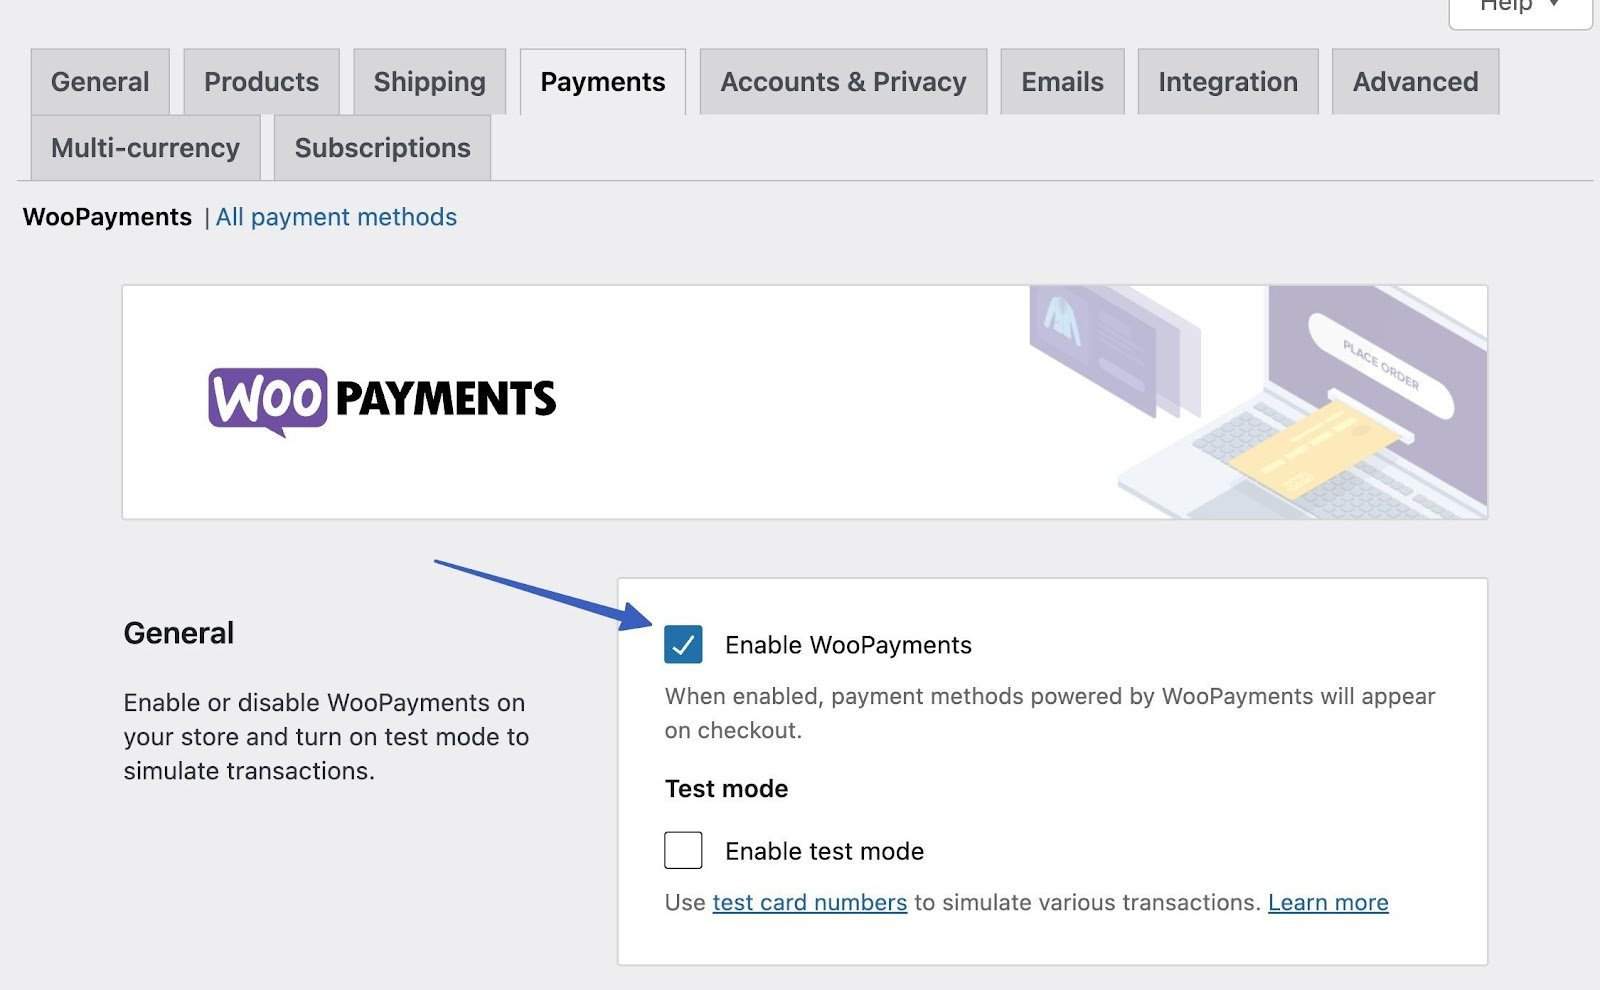 How to set up WooCommerce Payments by turning it on.